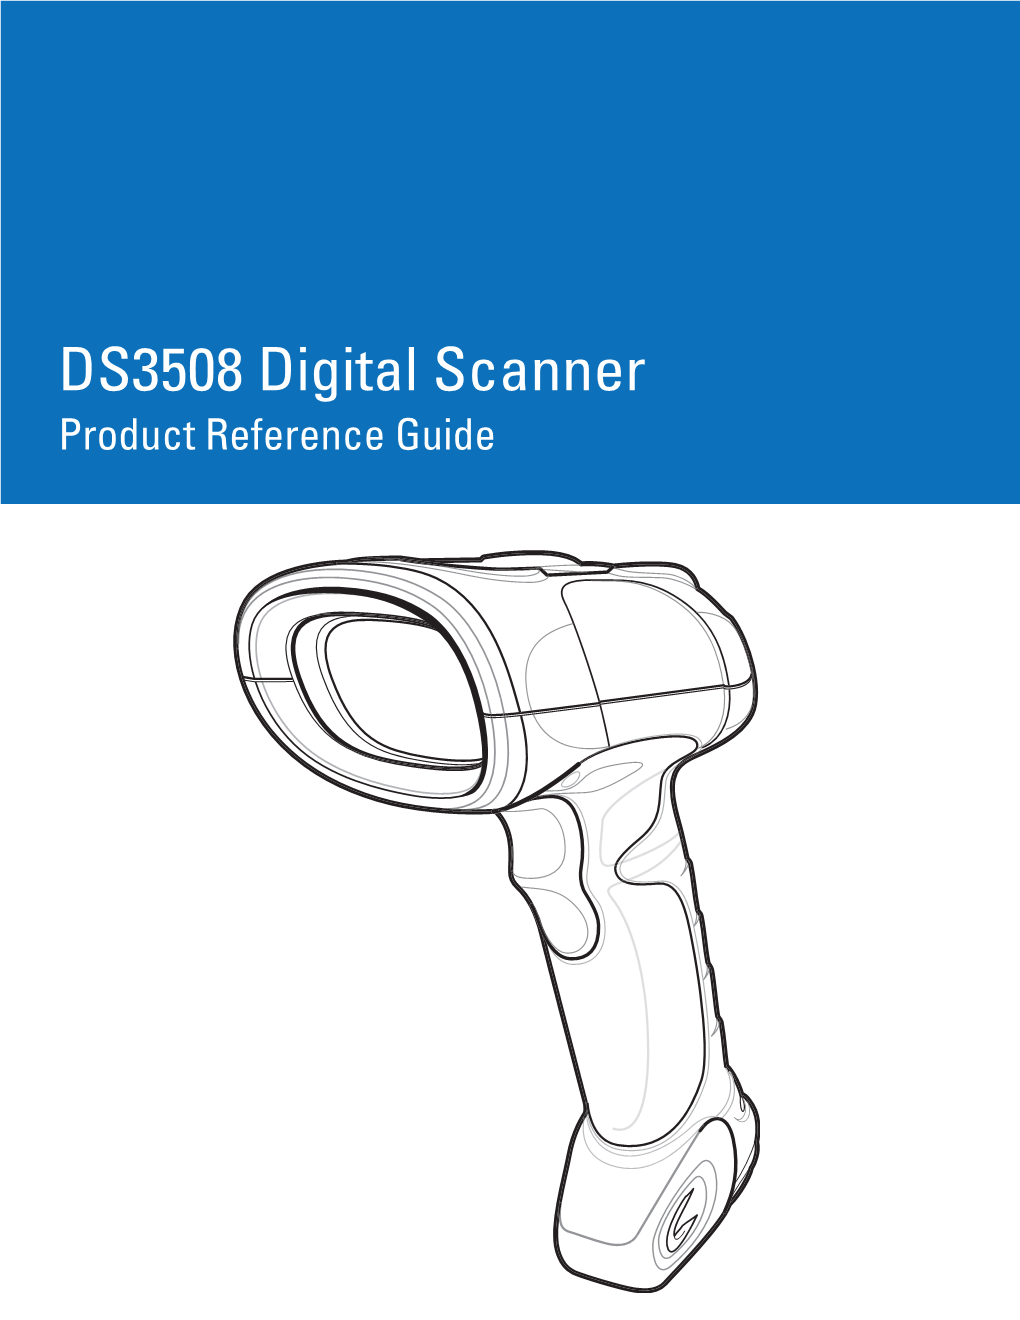 DS3508 Digital Scanner Product Reference Guide (P/N 72E-124801